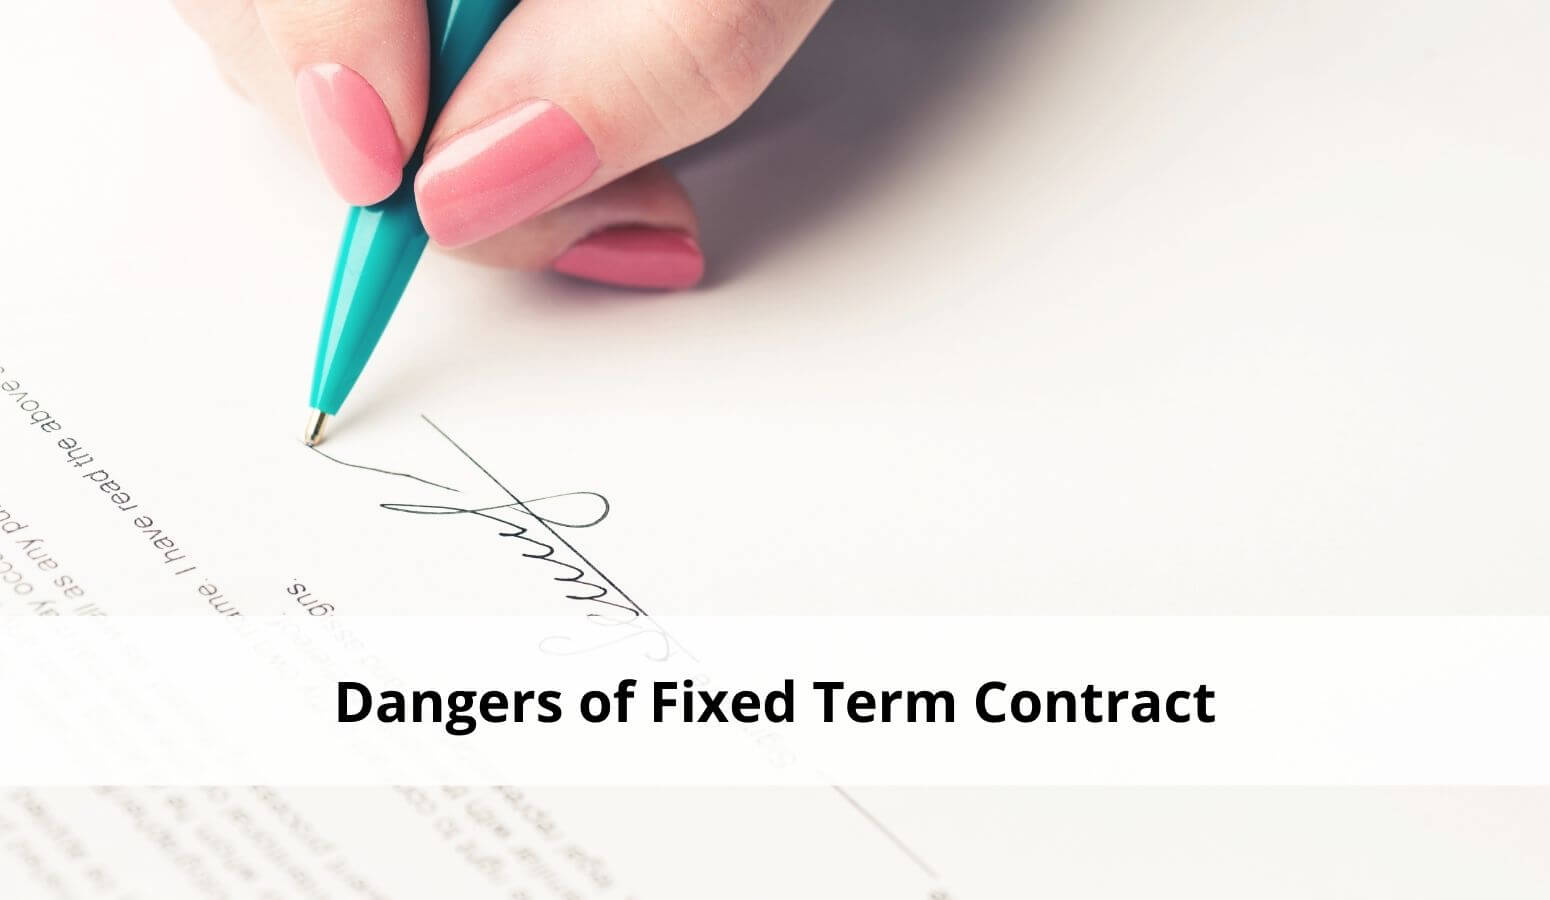 Fixed term contract